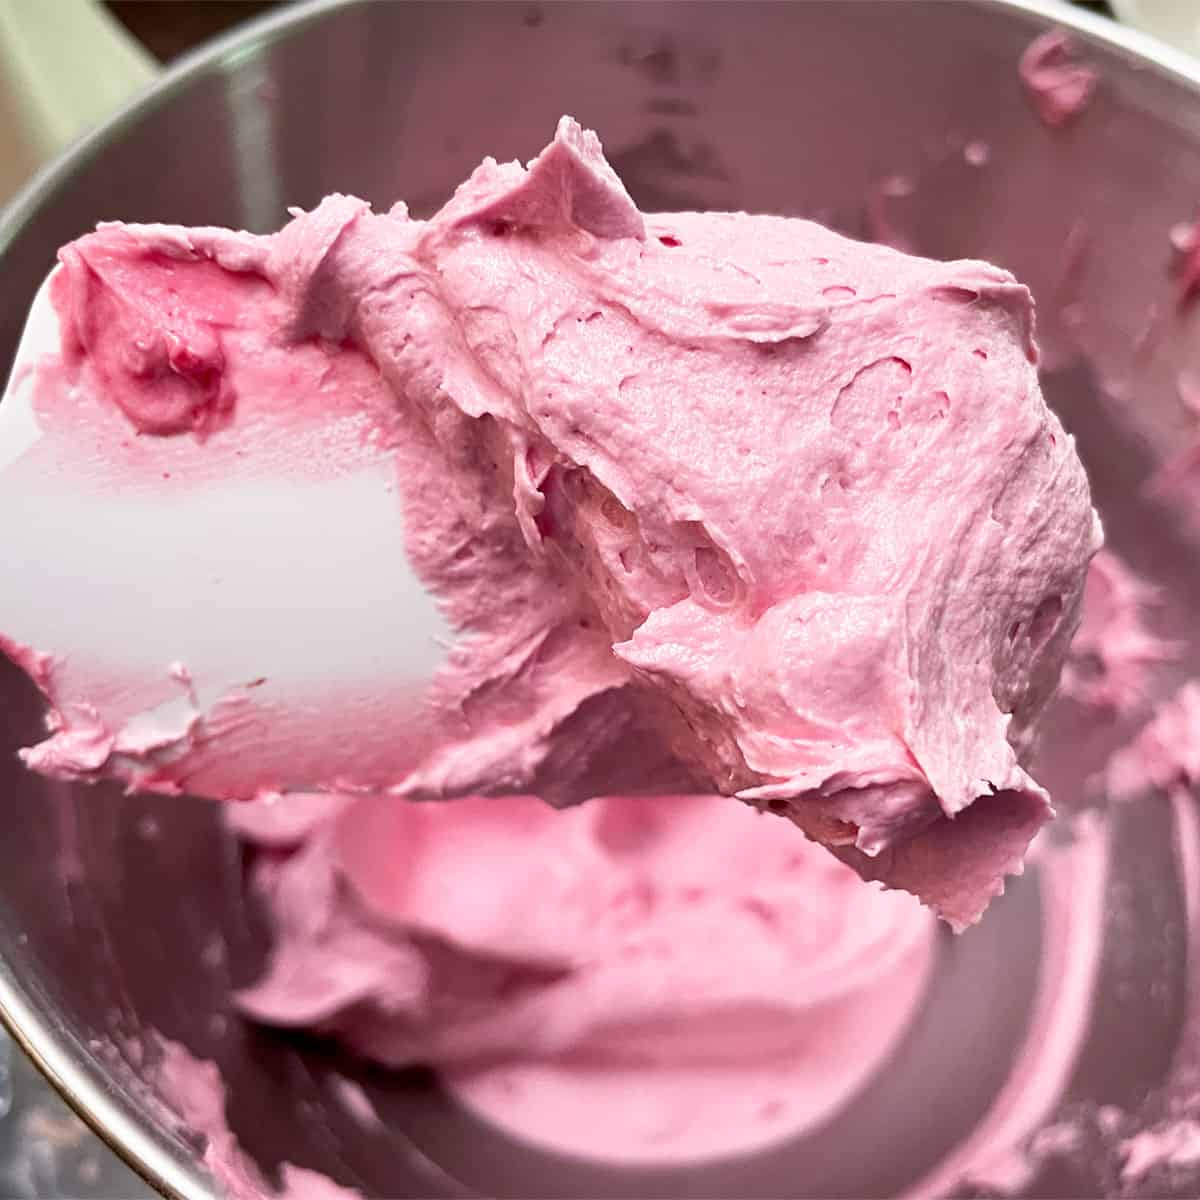 Blackberry buttercream after 6 minutes of mixing.